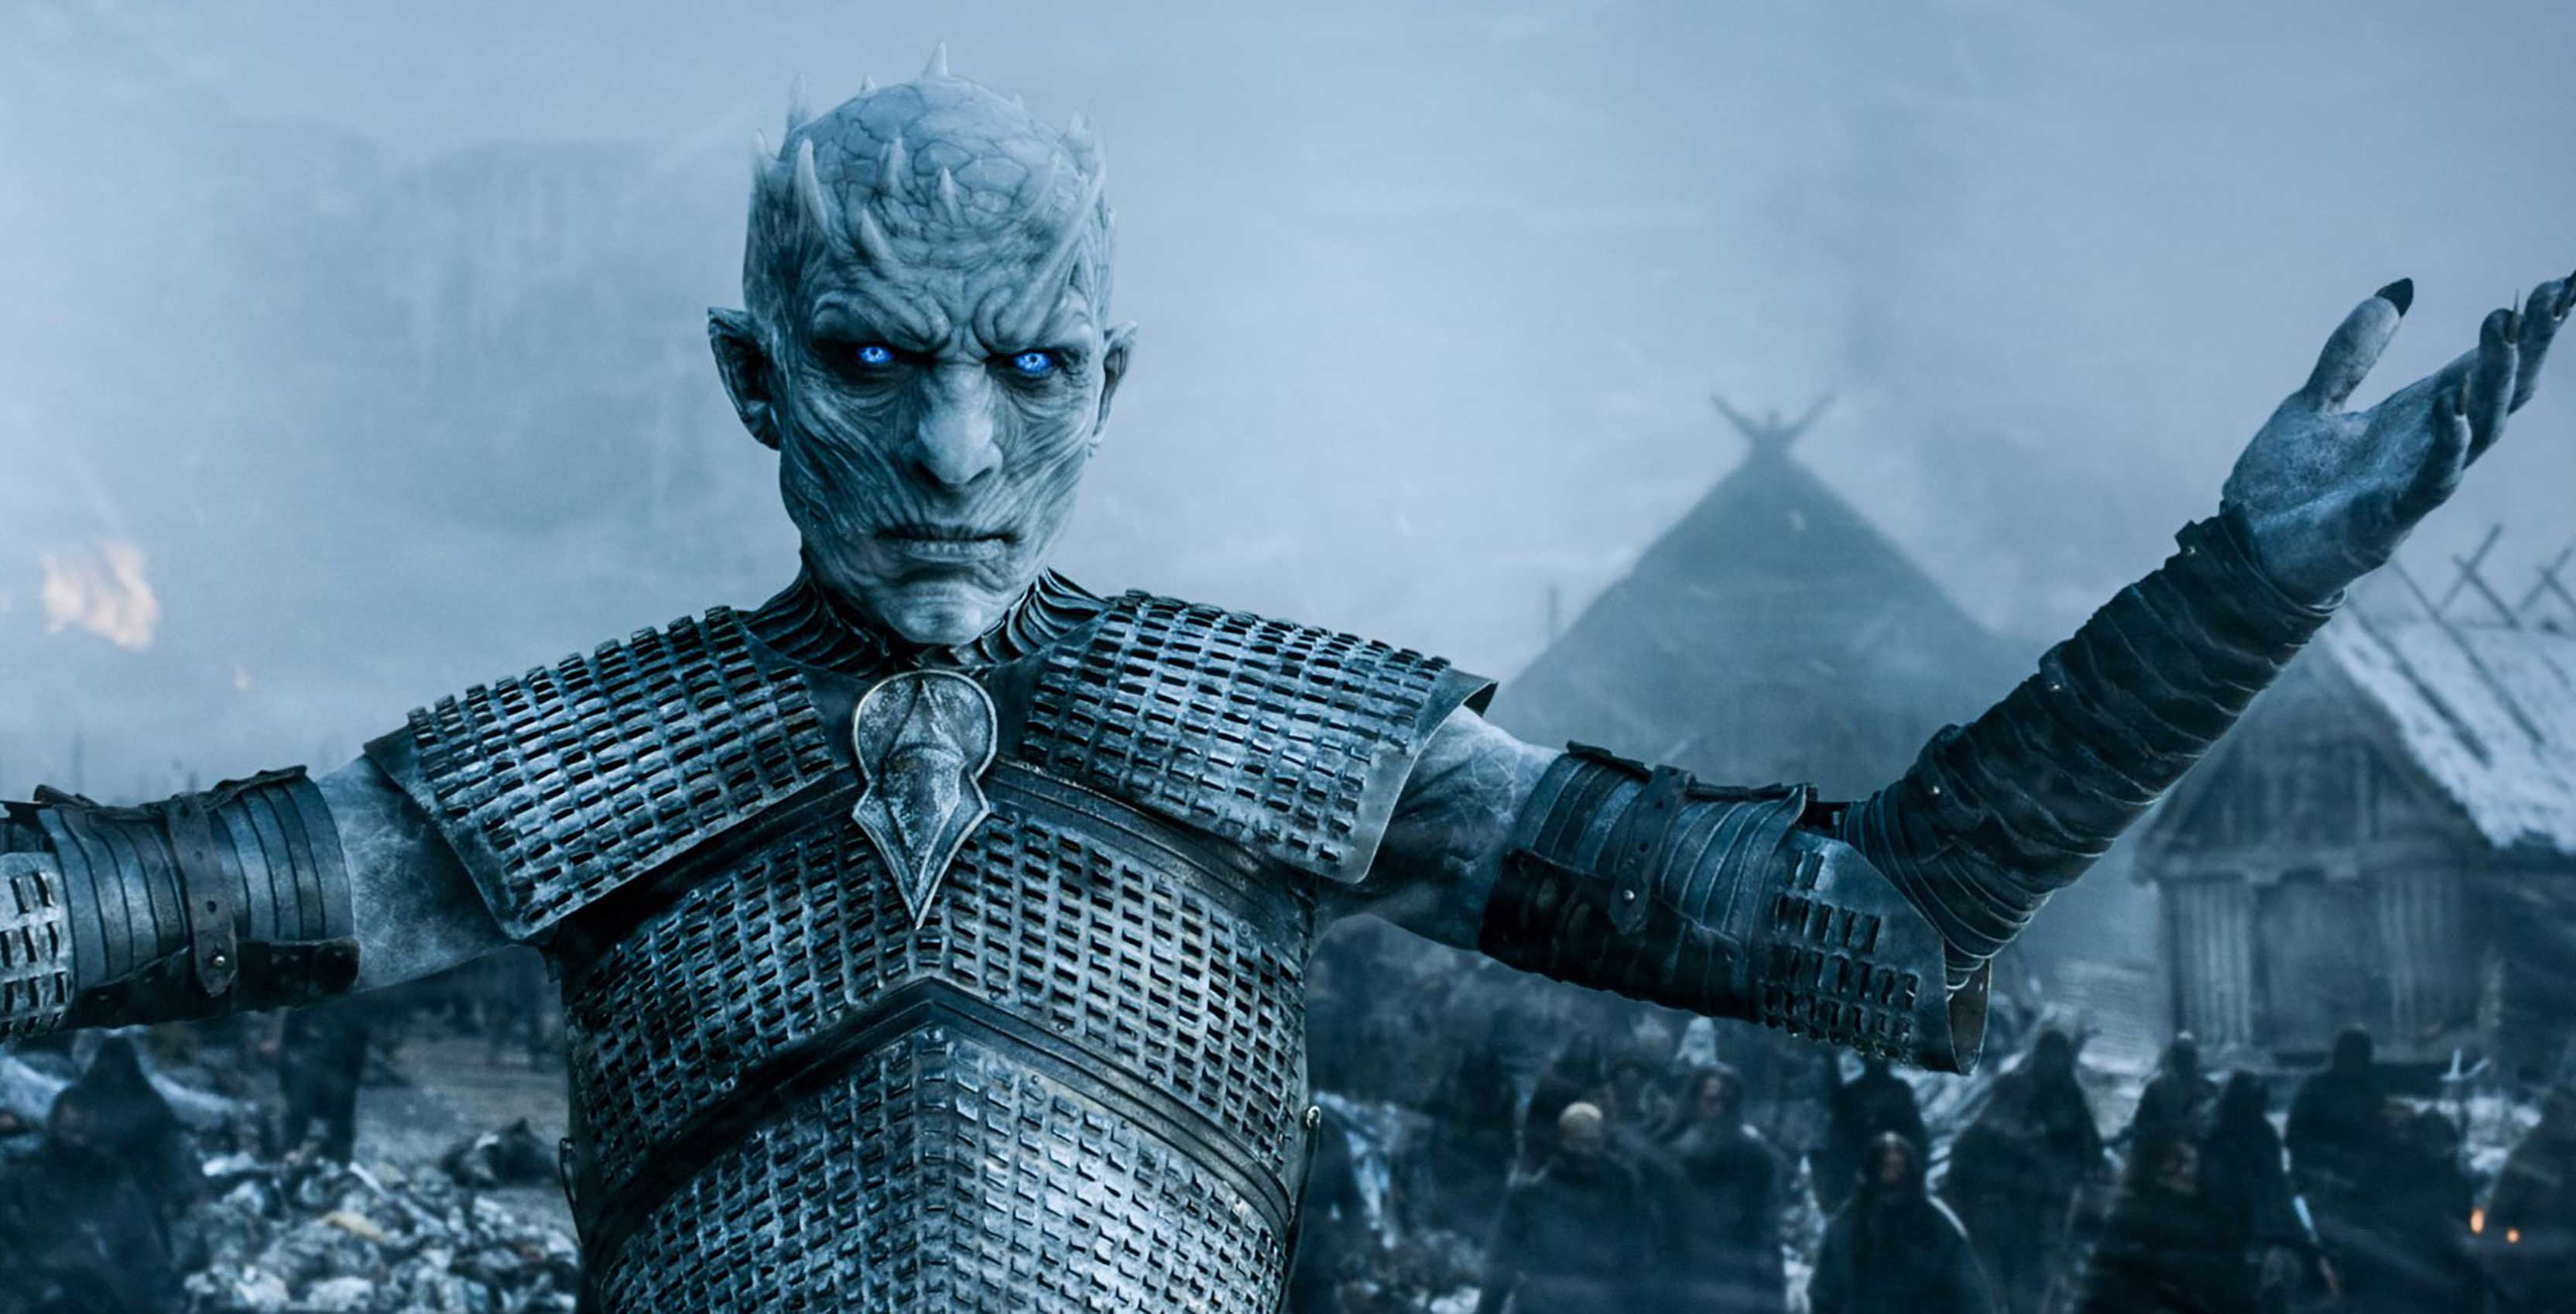 Game of Thrones white walkers